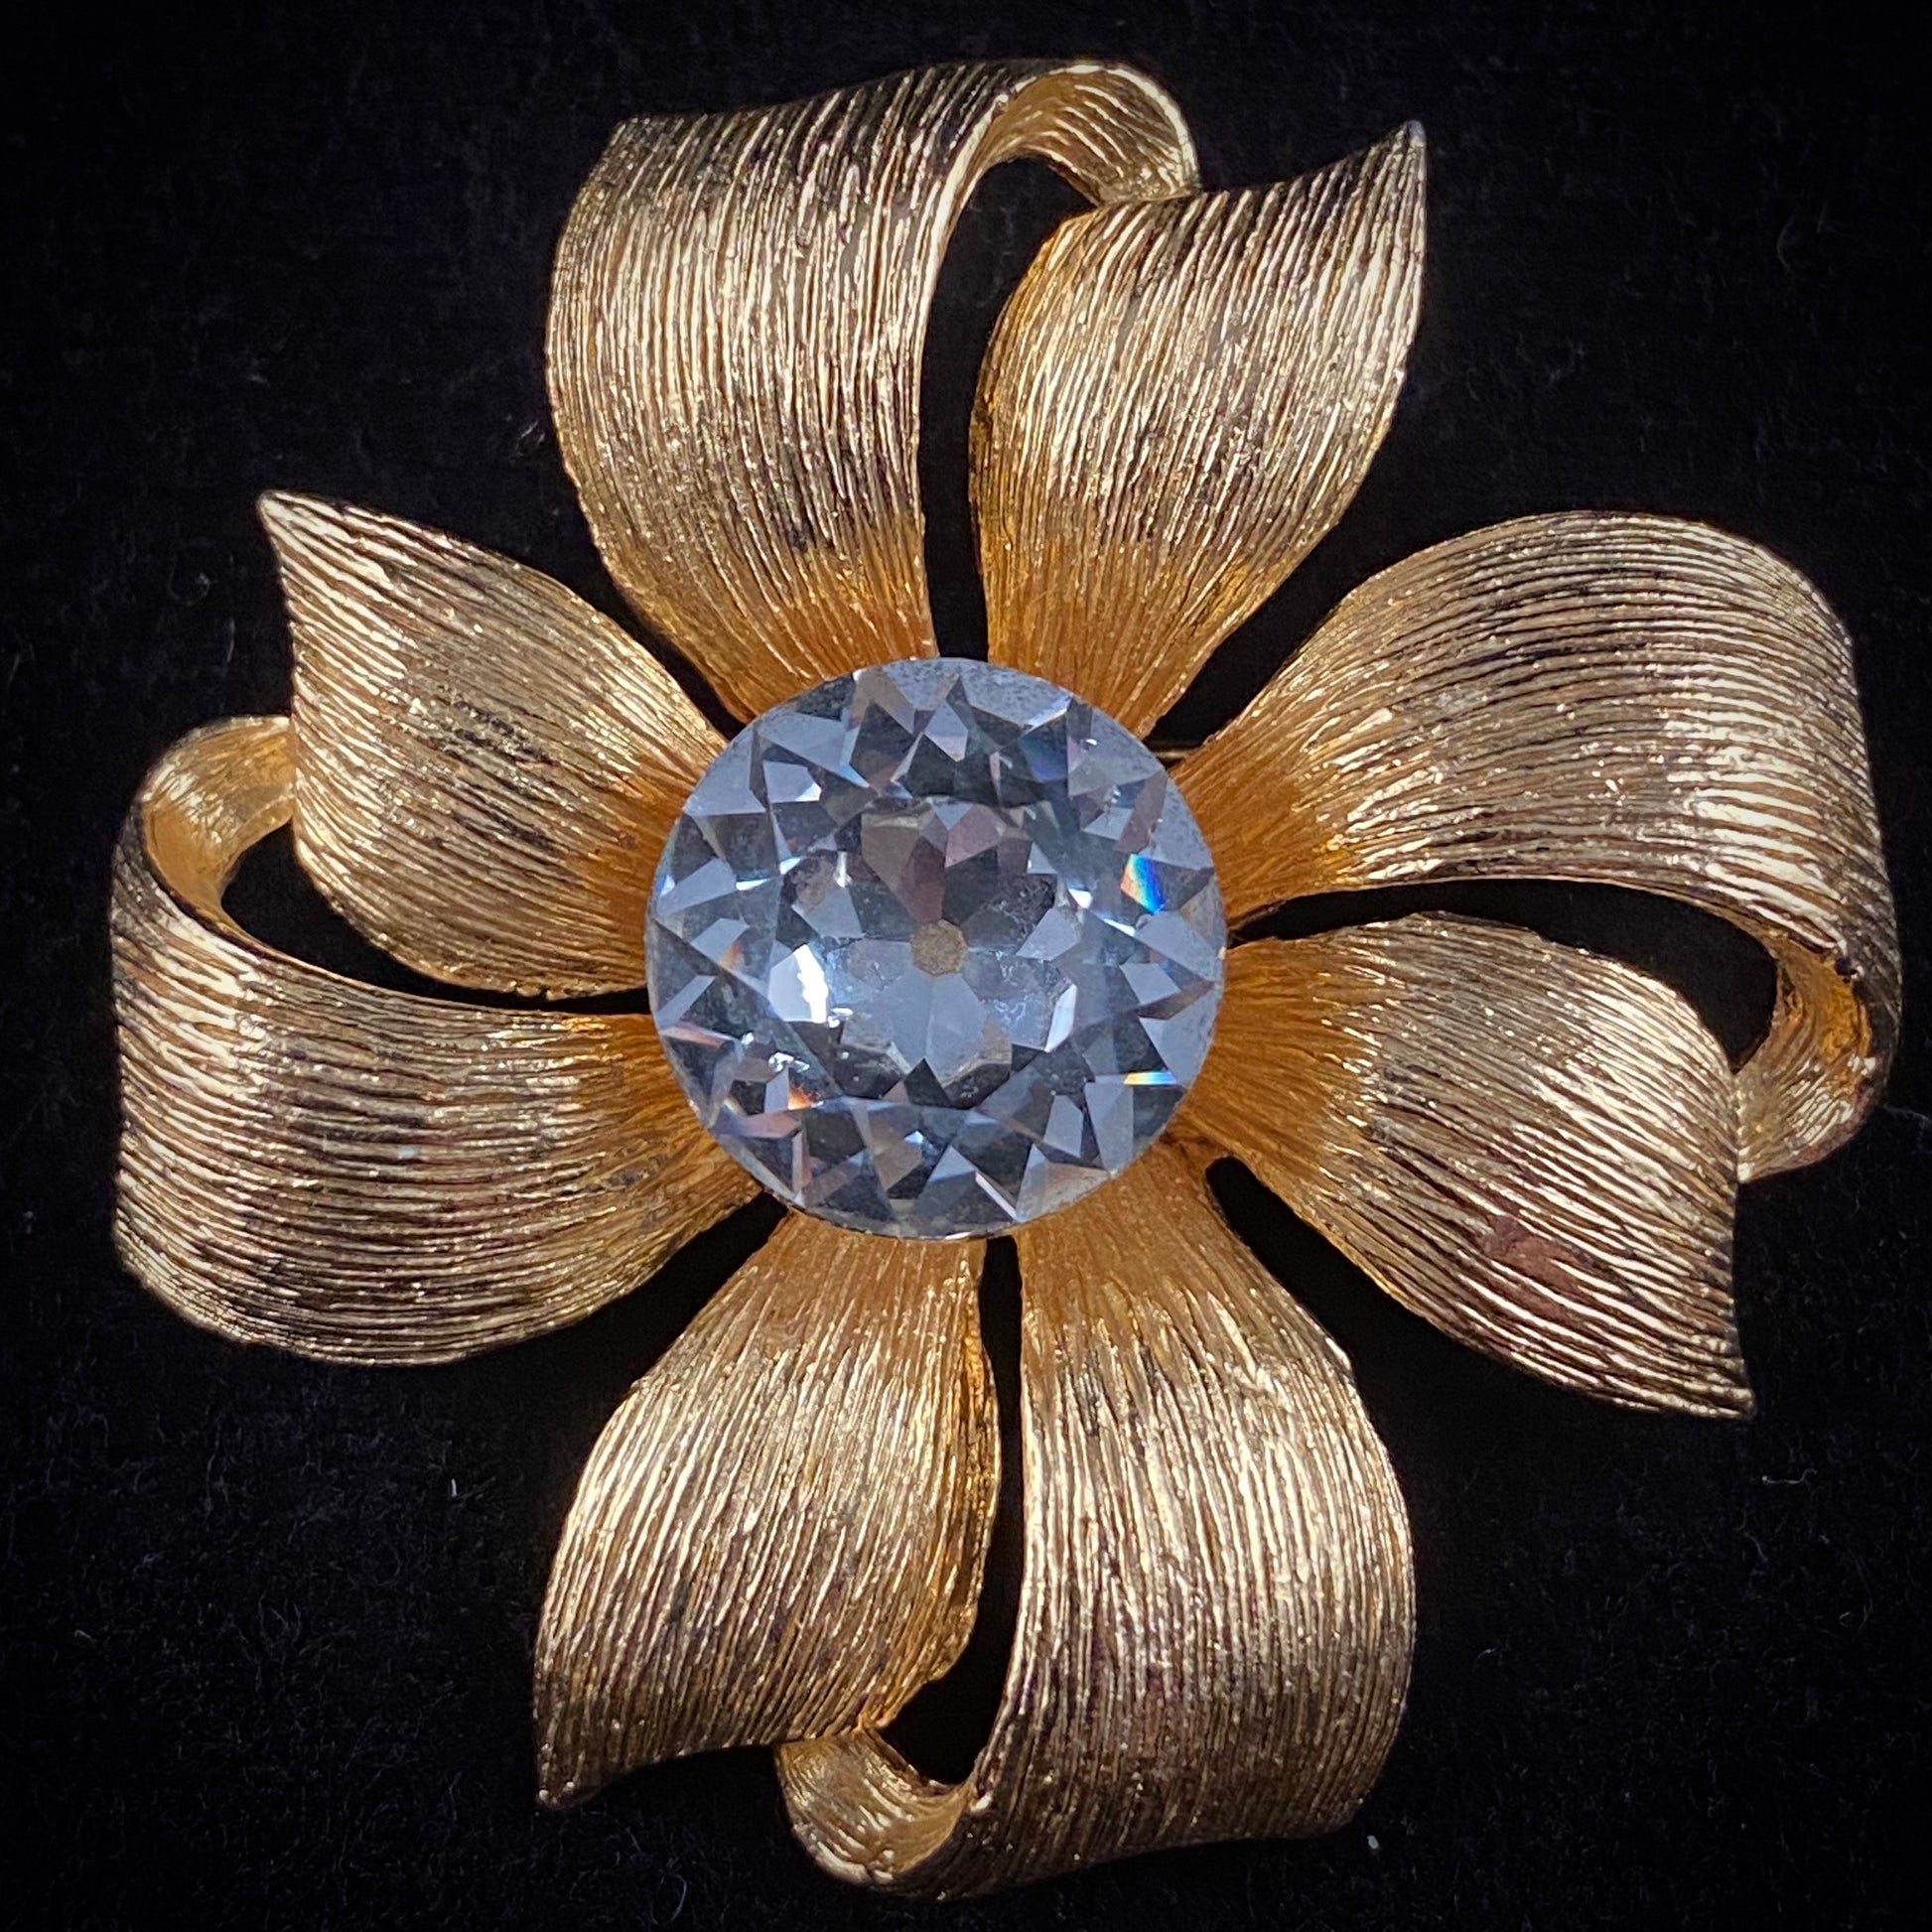 Late 50s/ Early 60s Dodds Rhinestone Brooch - Retro Kandy Vintage